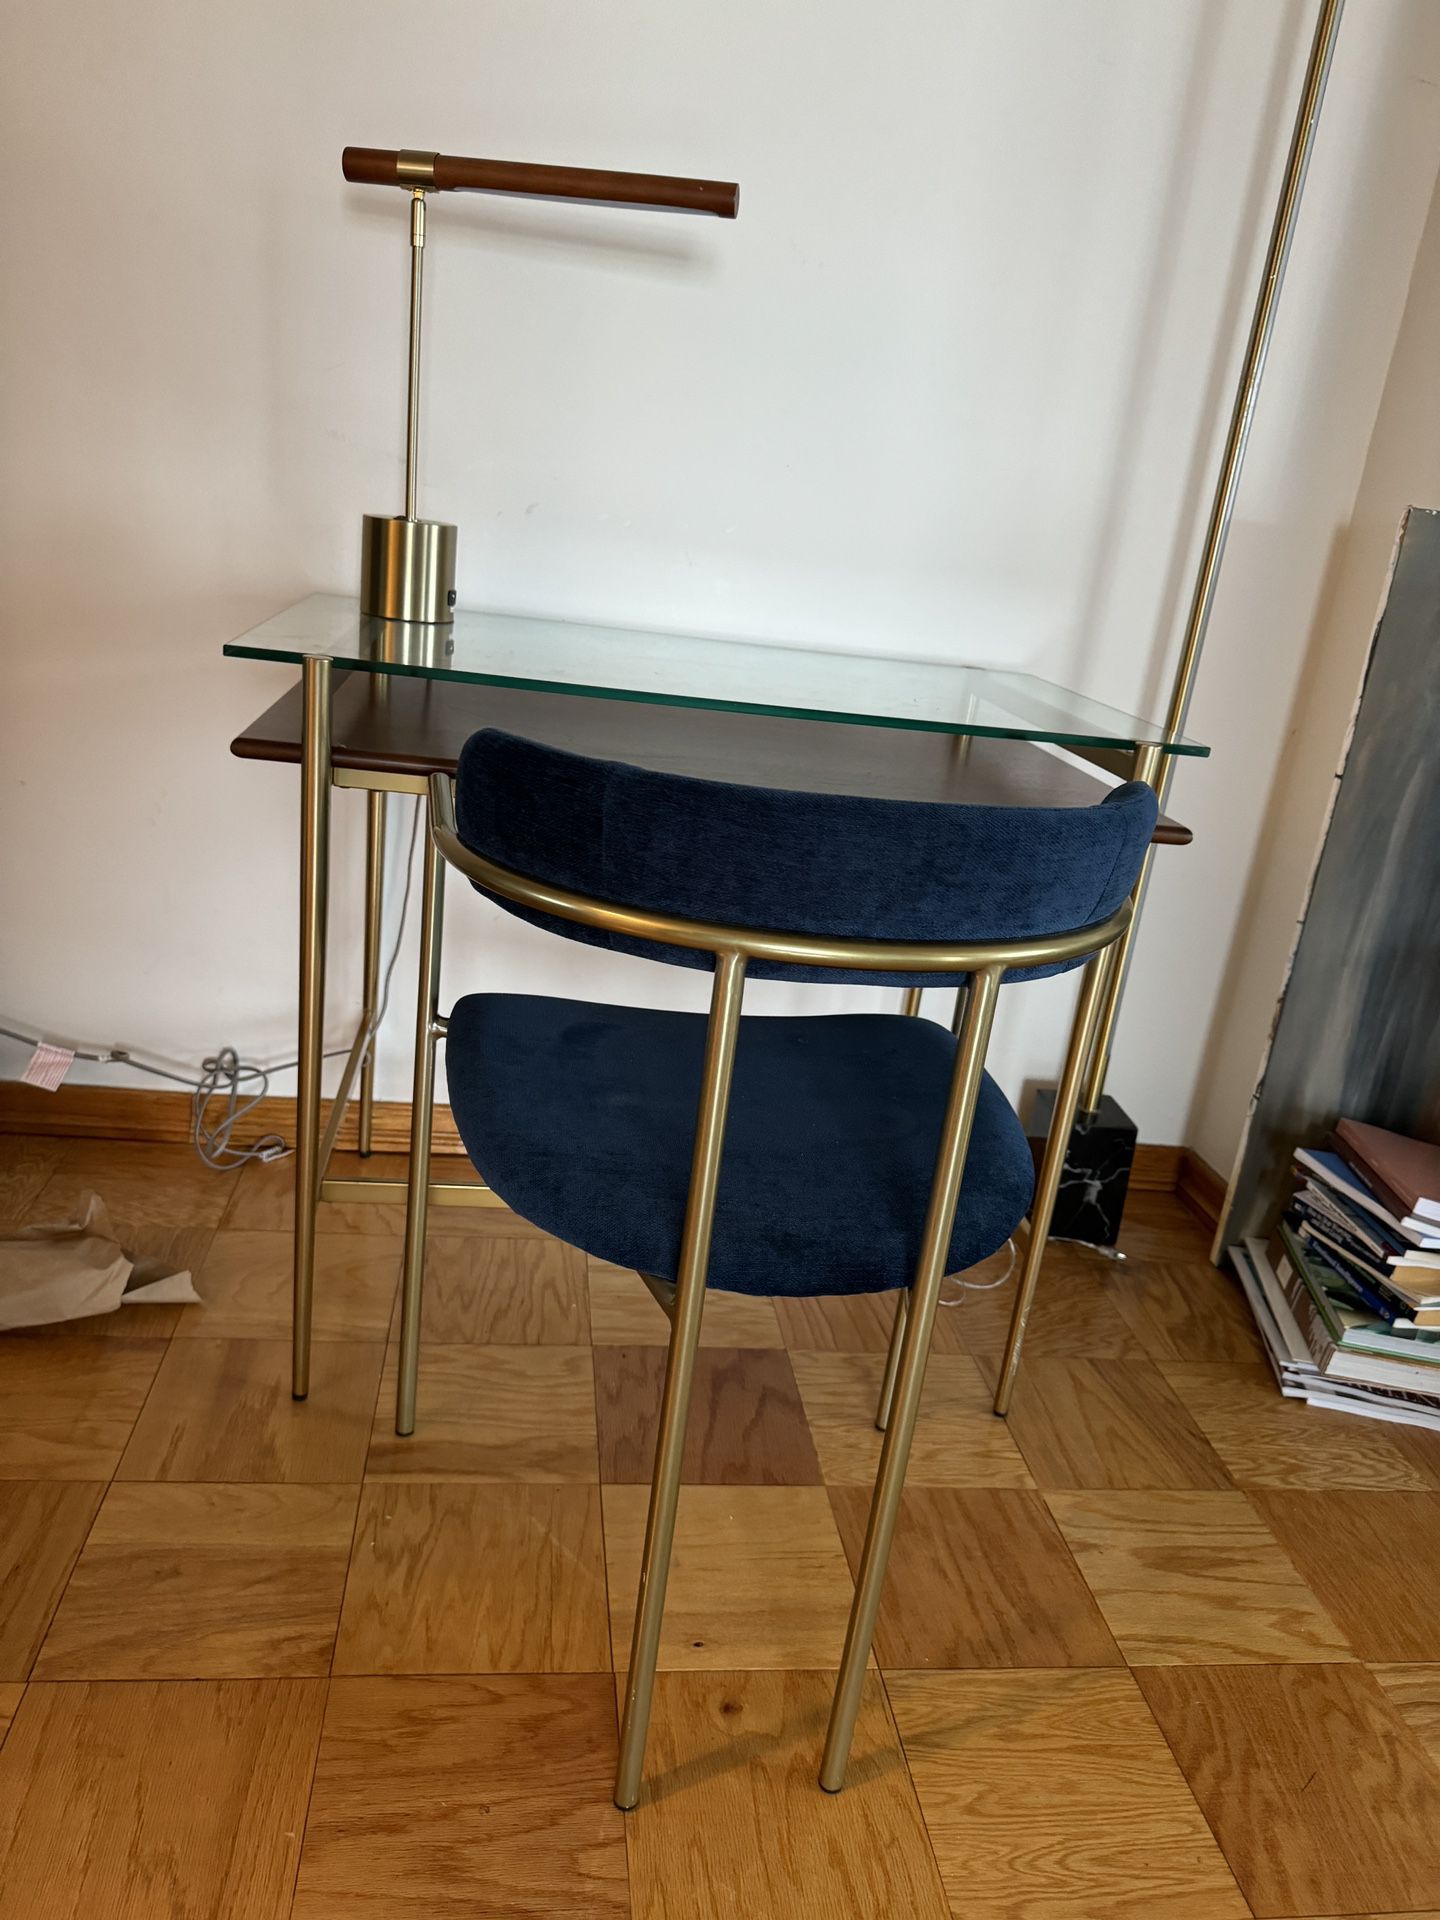 Westelm glass and metal table with chair and lamp